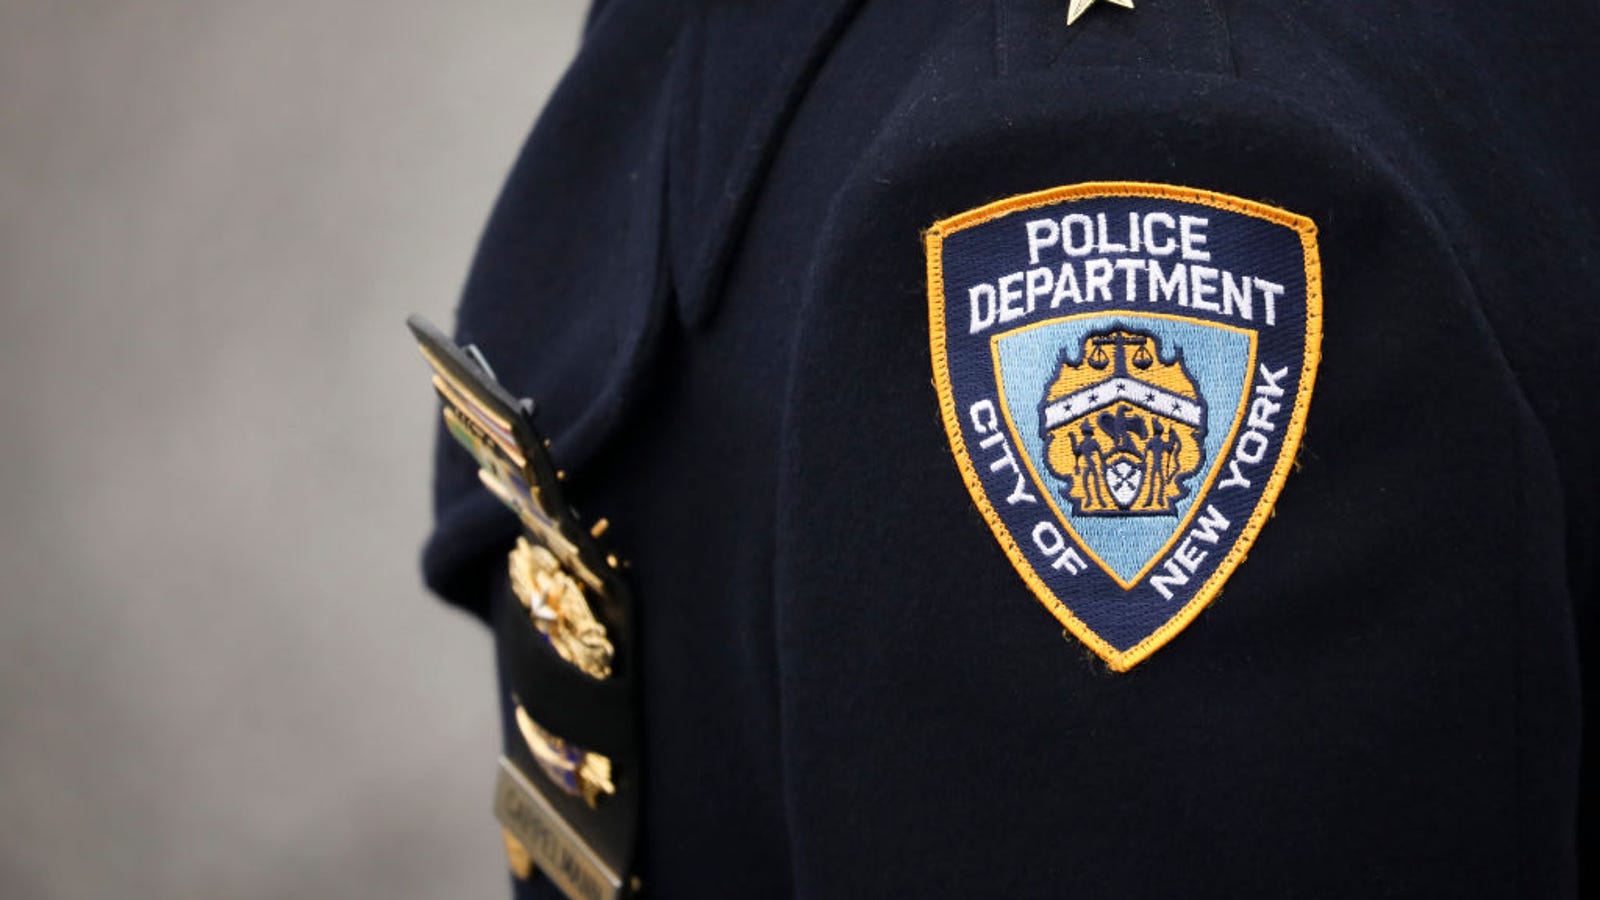 New York Peace Officer Charged After Punching and Kicking Homeless Man